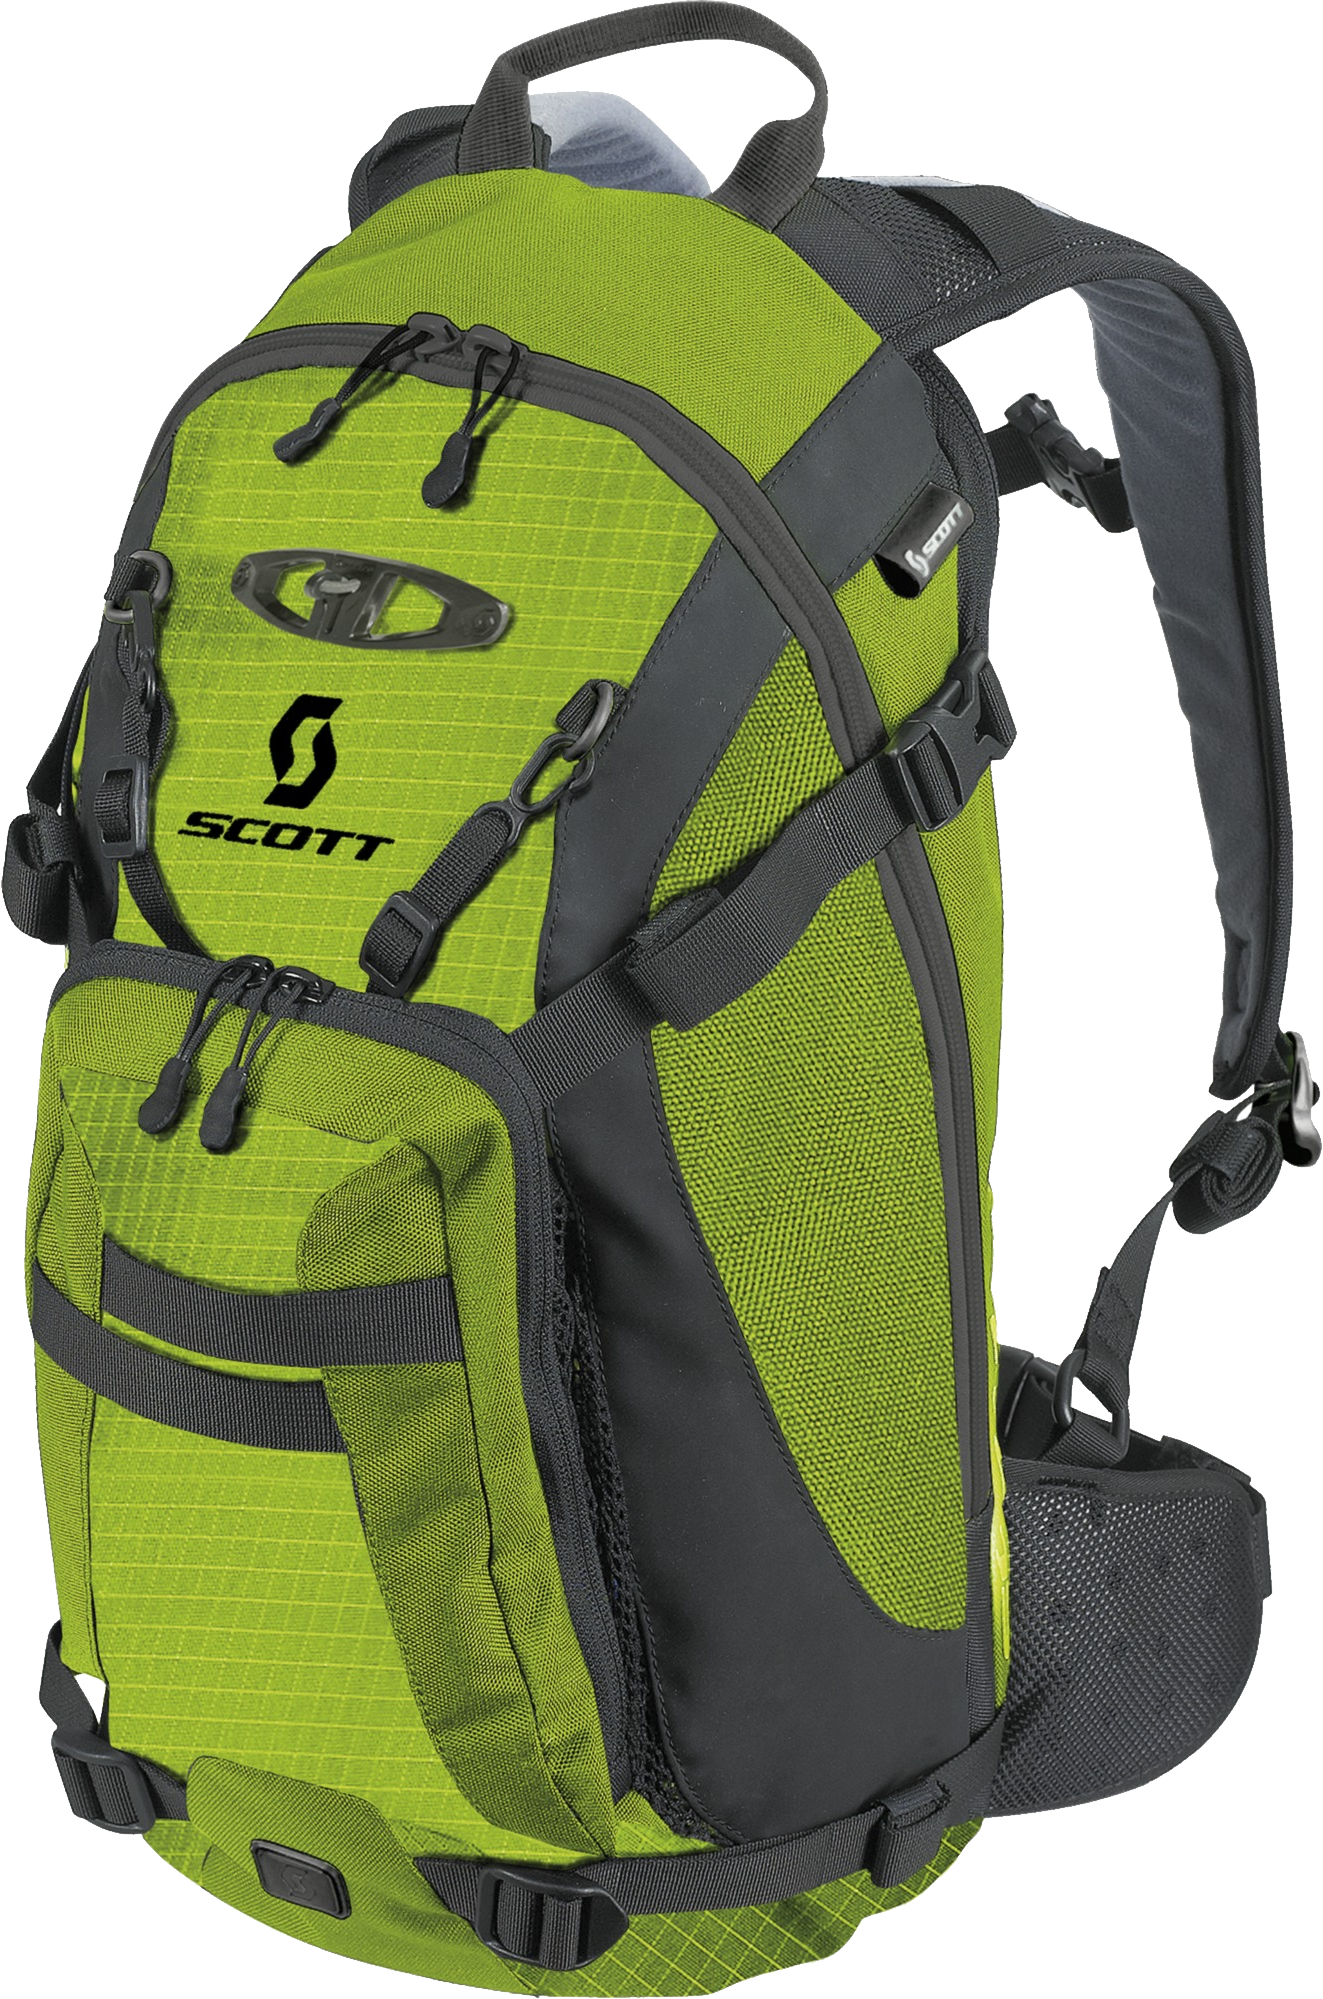 Backpack PNG Pic